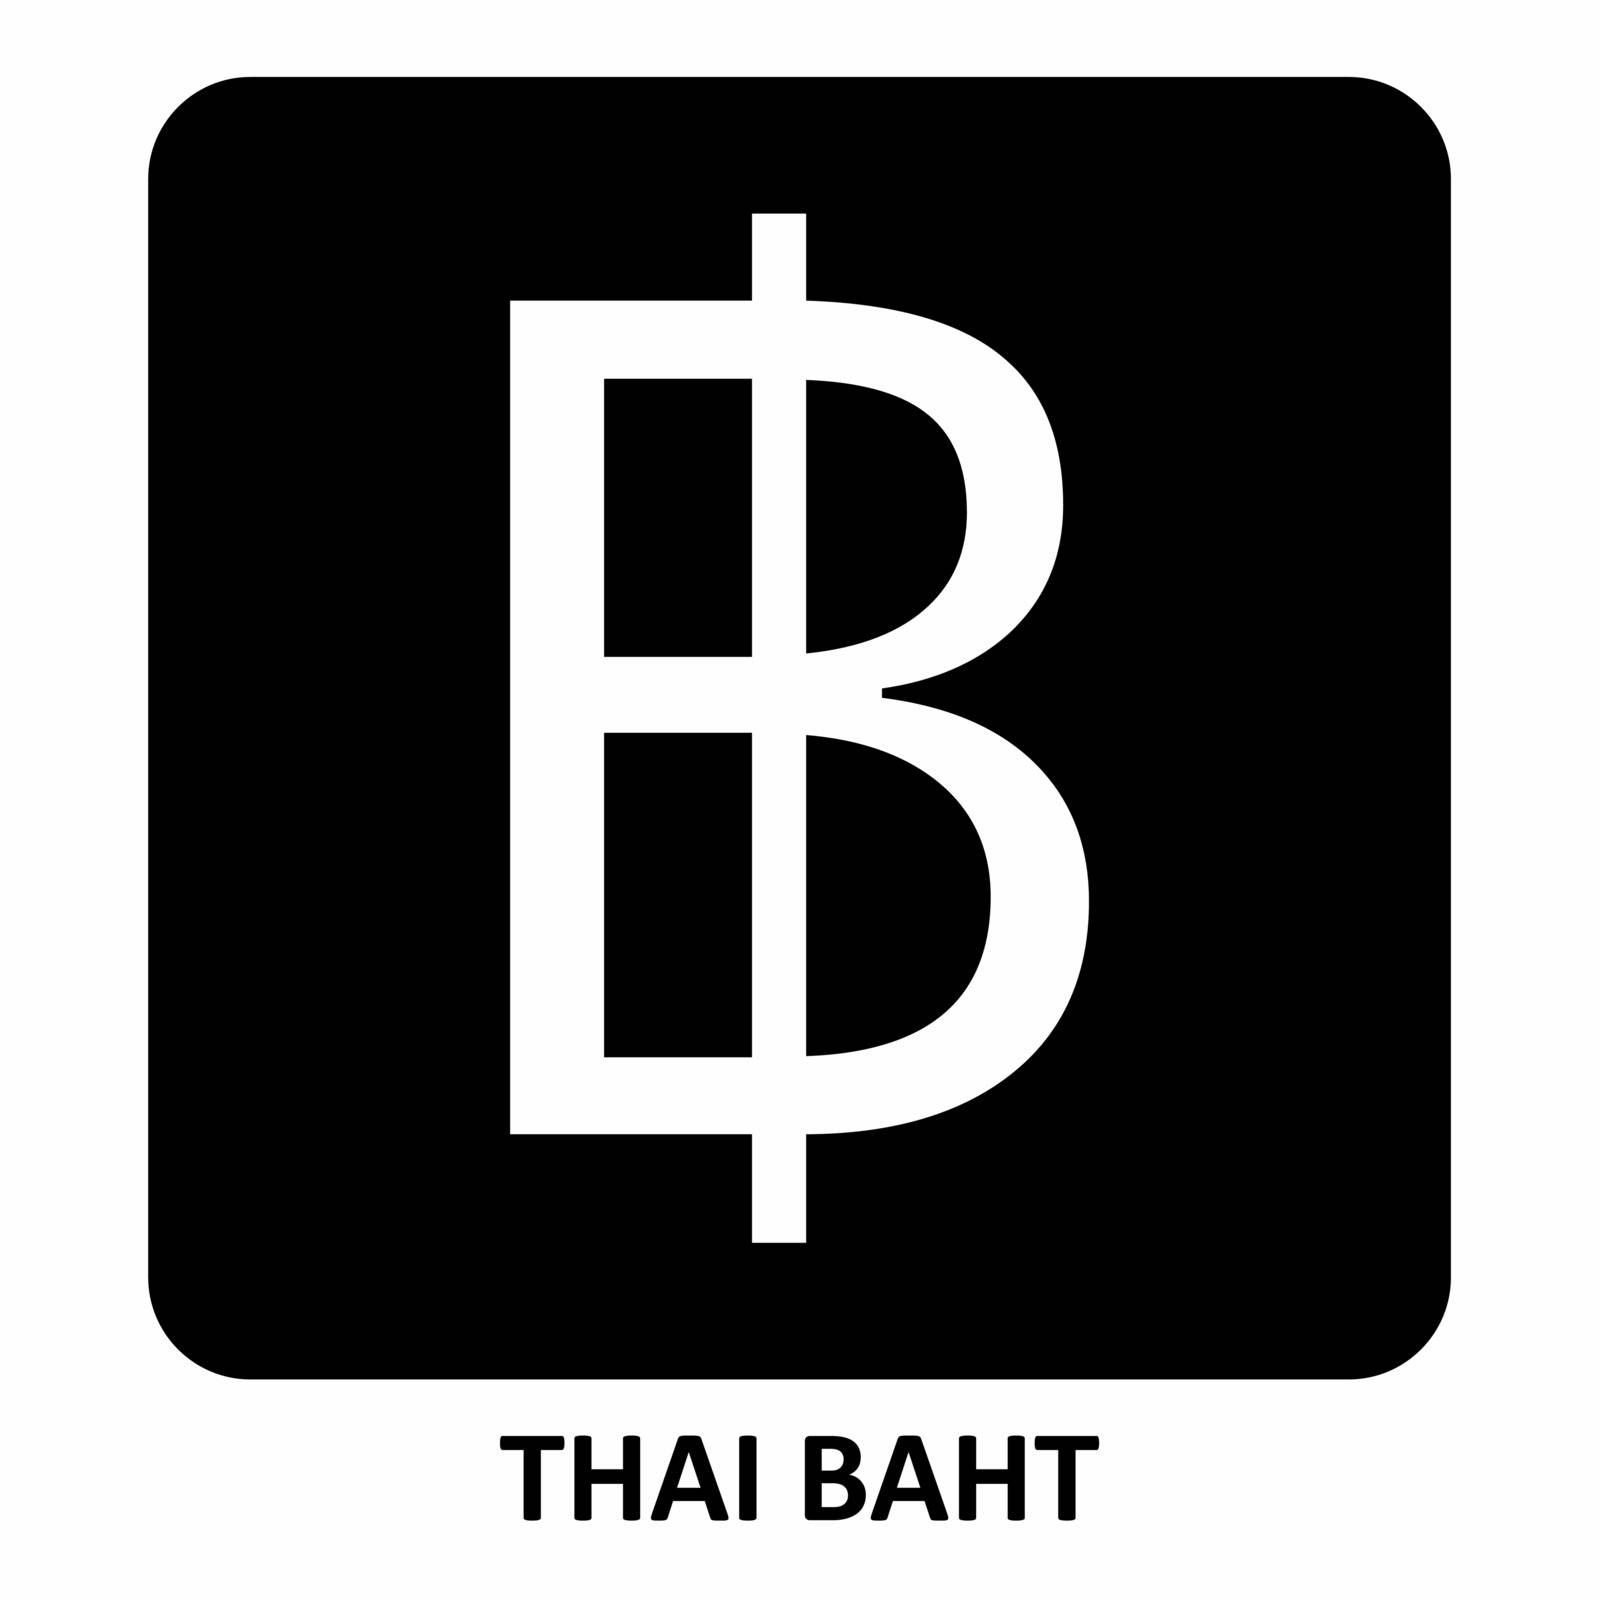 Thai Baht currency symbol by luisrftc